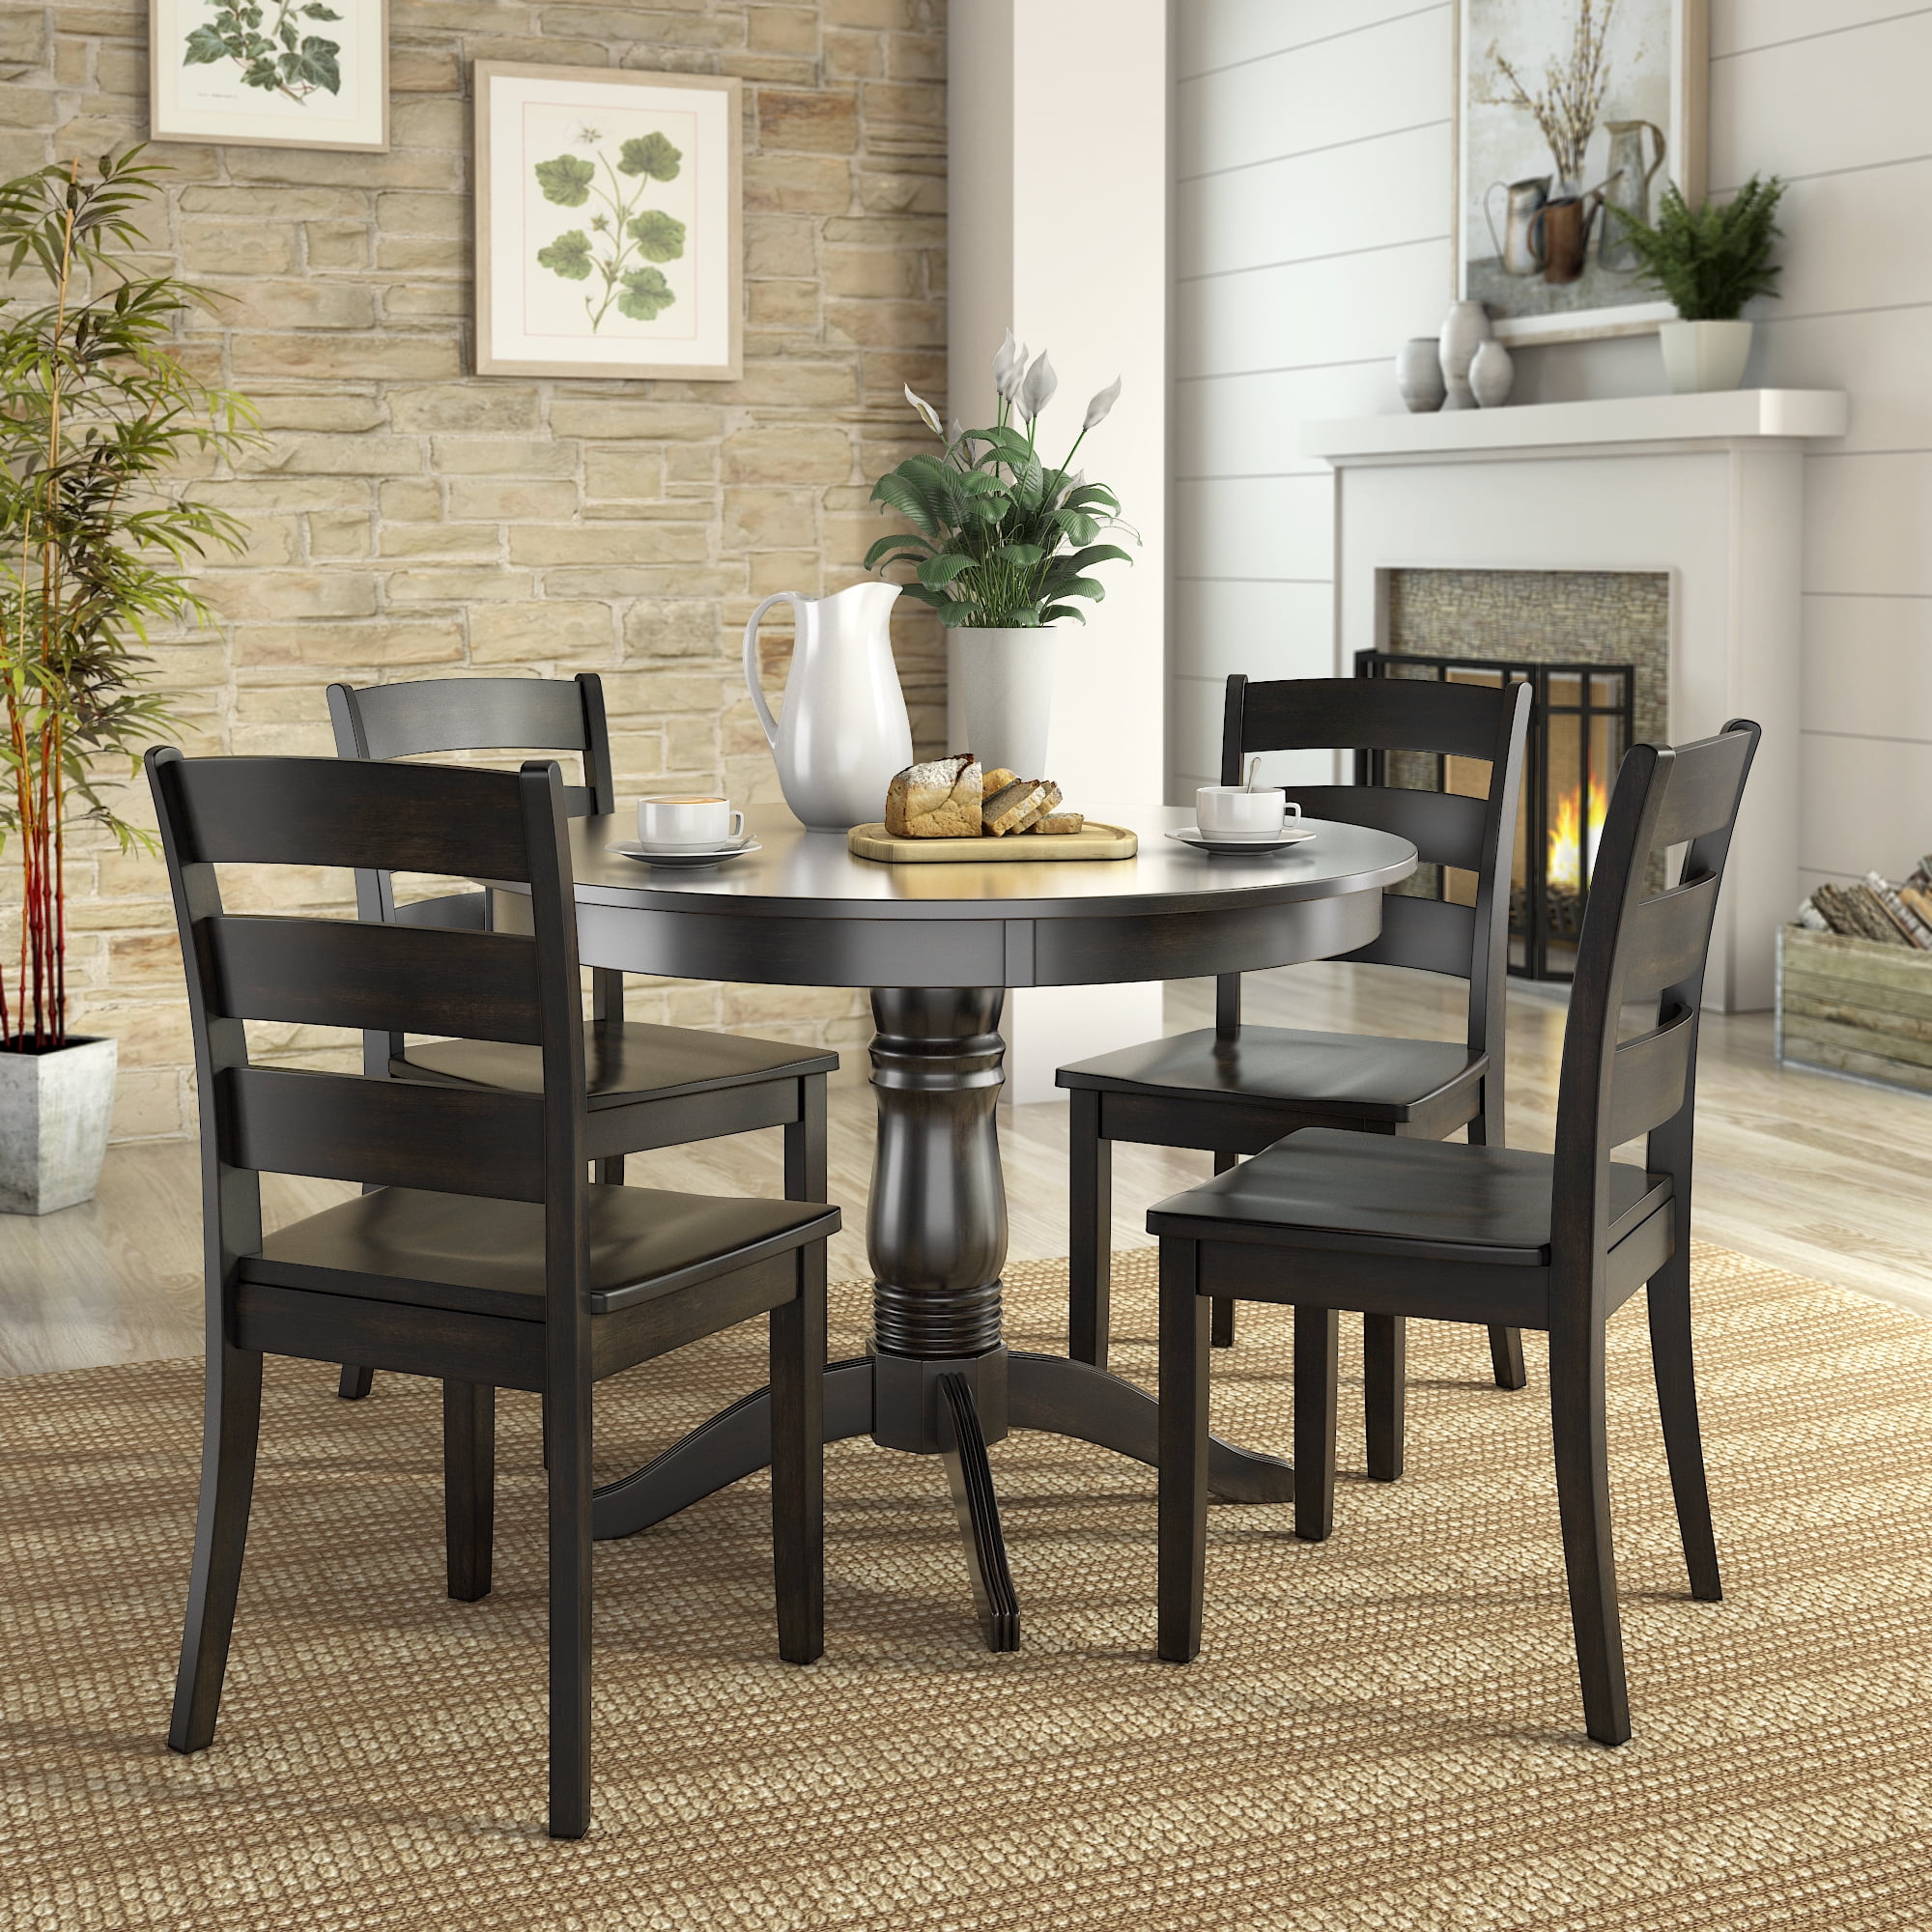 Modern Walmart Dining Table Set with Simple Decor